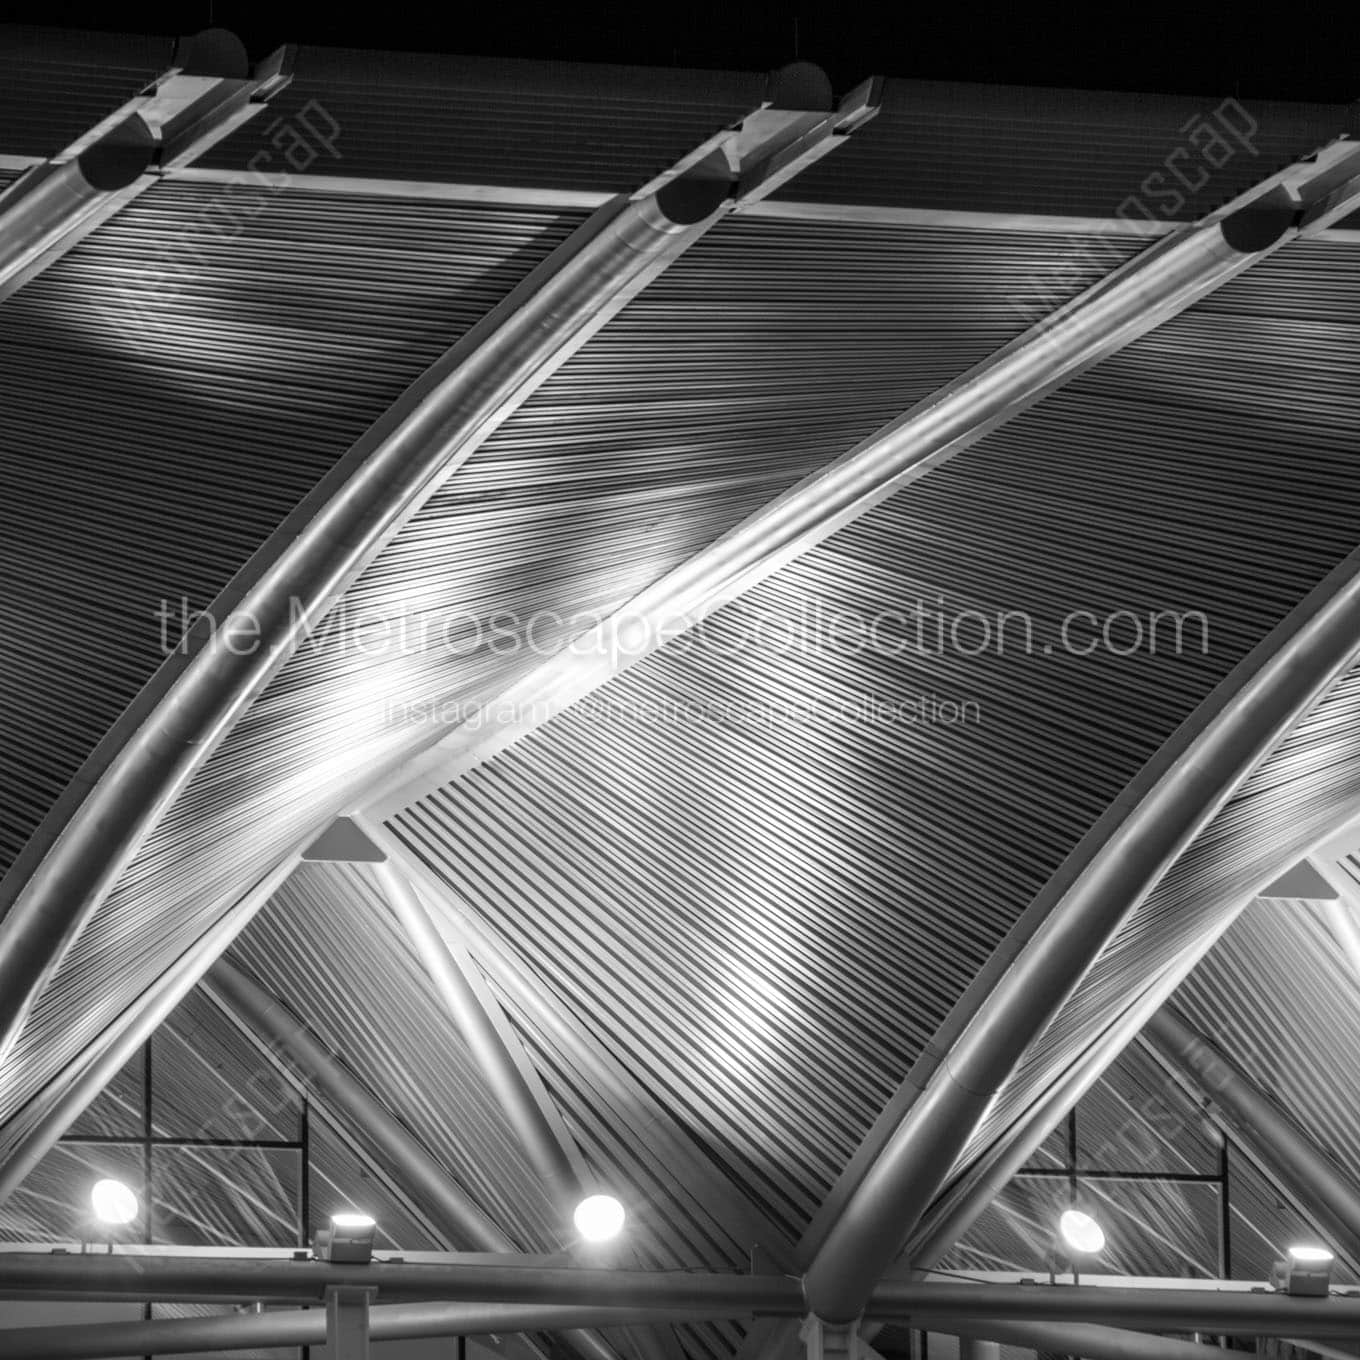 phillips performing arts center canopy Black & White Wall Art